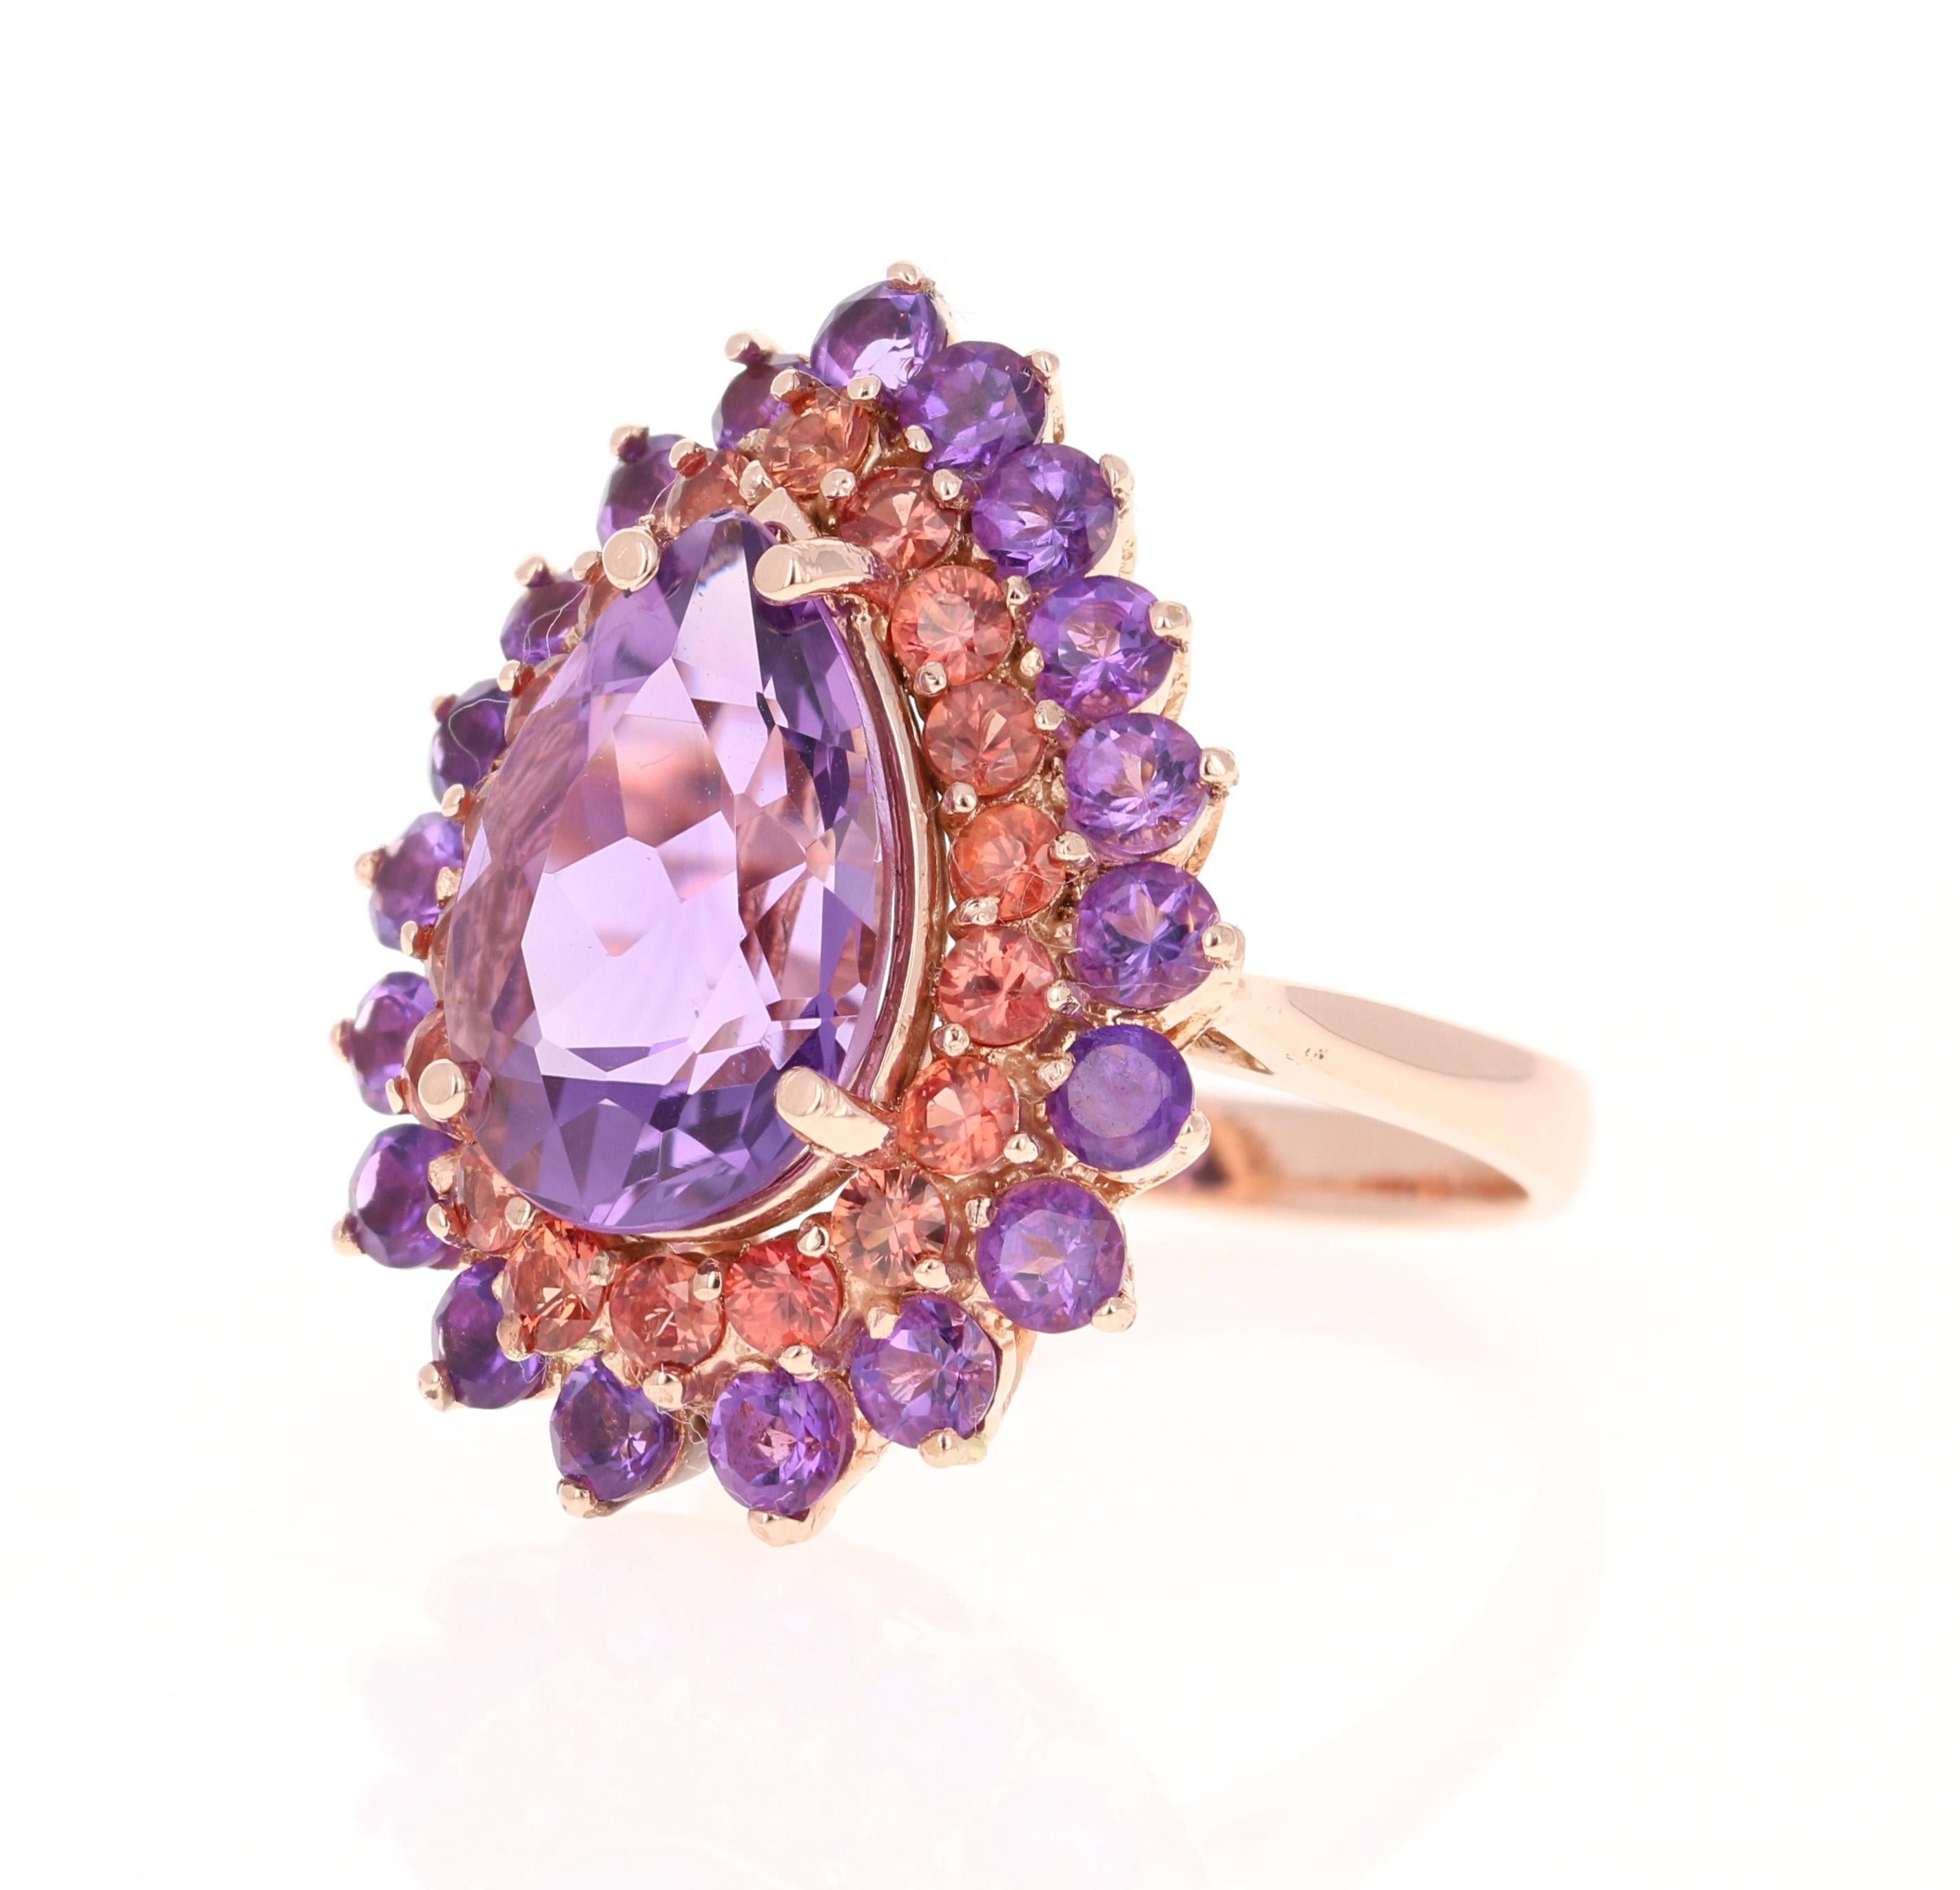 8.90 Carat Pear Cut Amethyst Sapphire 14 Karat Rose Gold Cocktail Ring!
This beautiful ring has a 5.61 Carat Pear Cut Amethyst and is surrounded by a row of sparkling Red Sapphires that weigh 1.44 Carats and a row of Amethysts that weigh 1.85